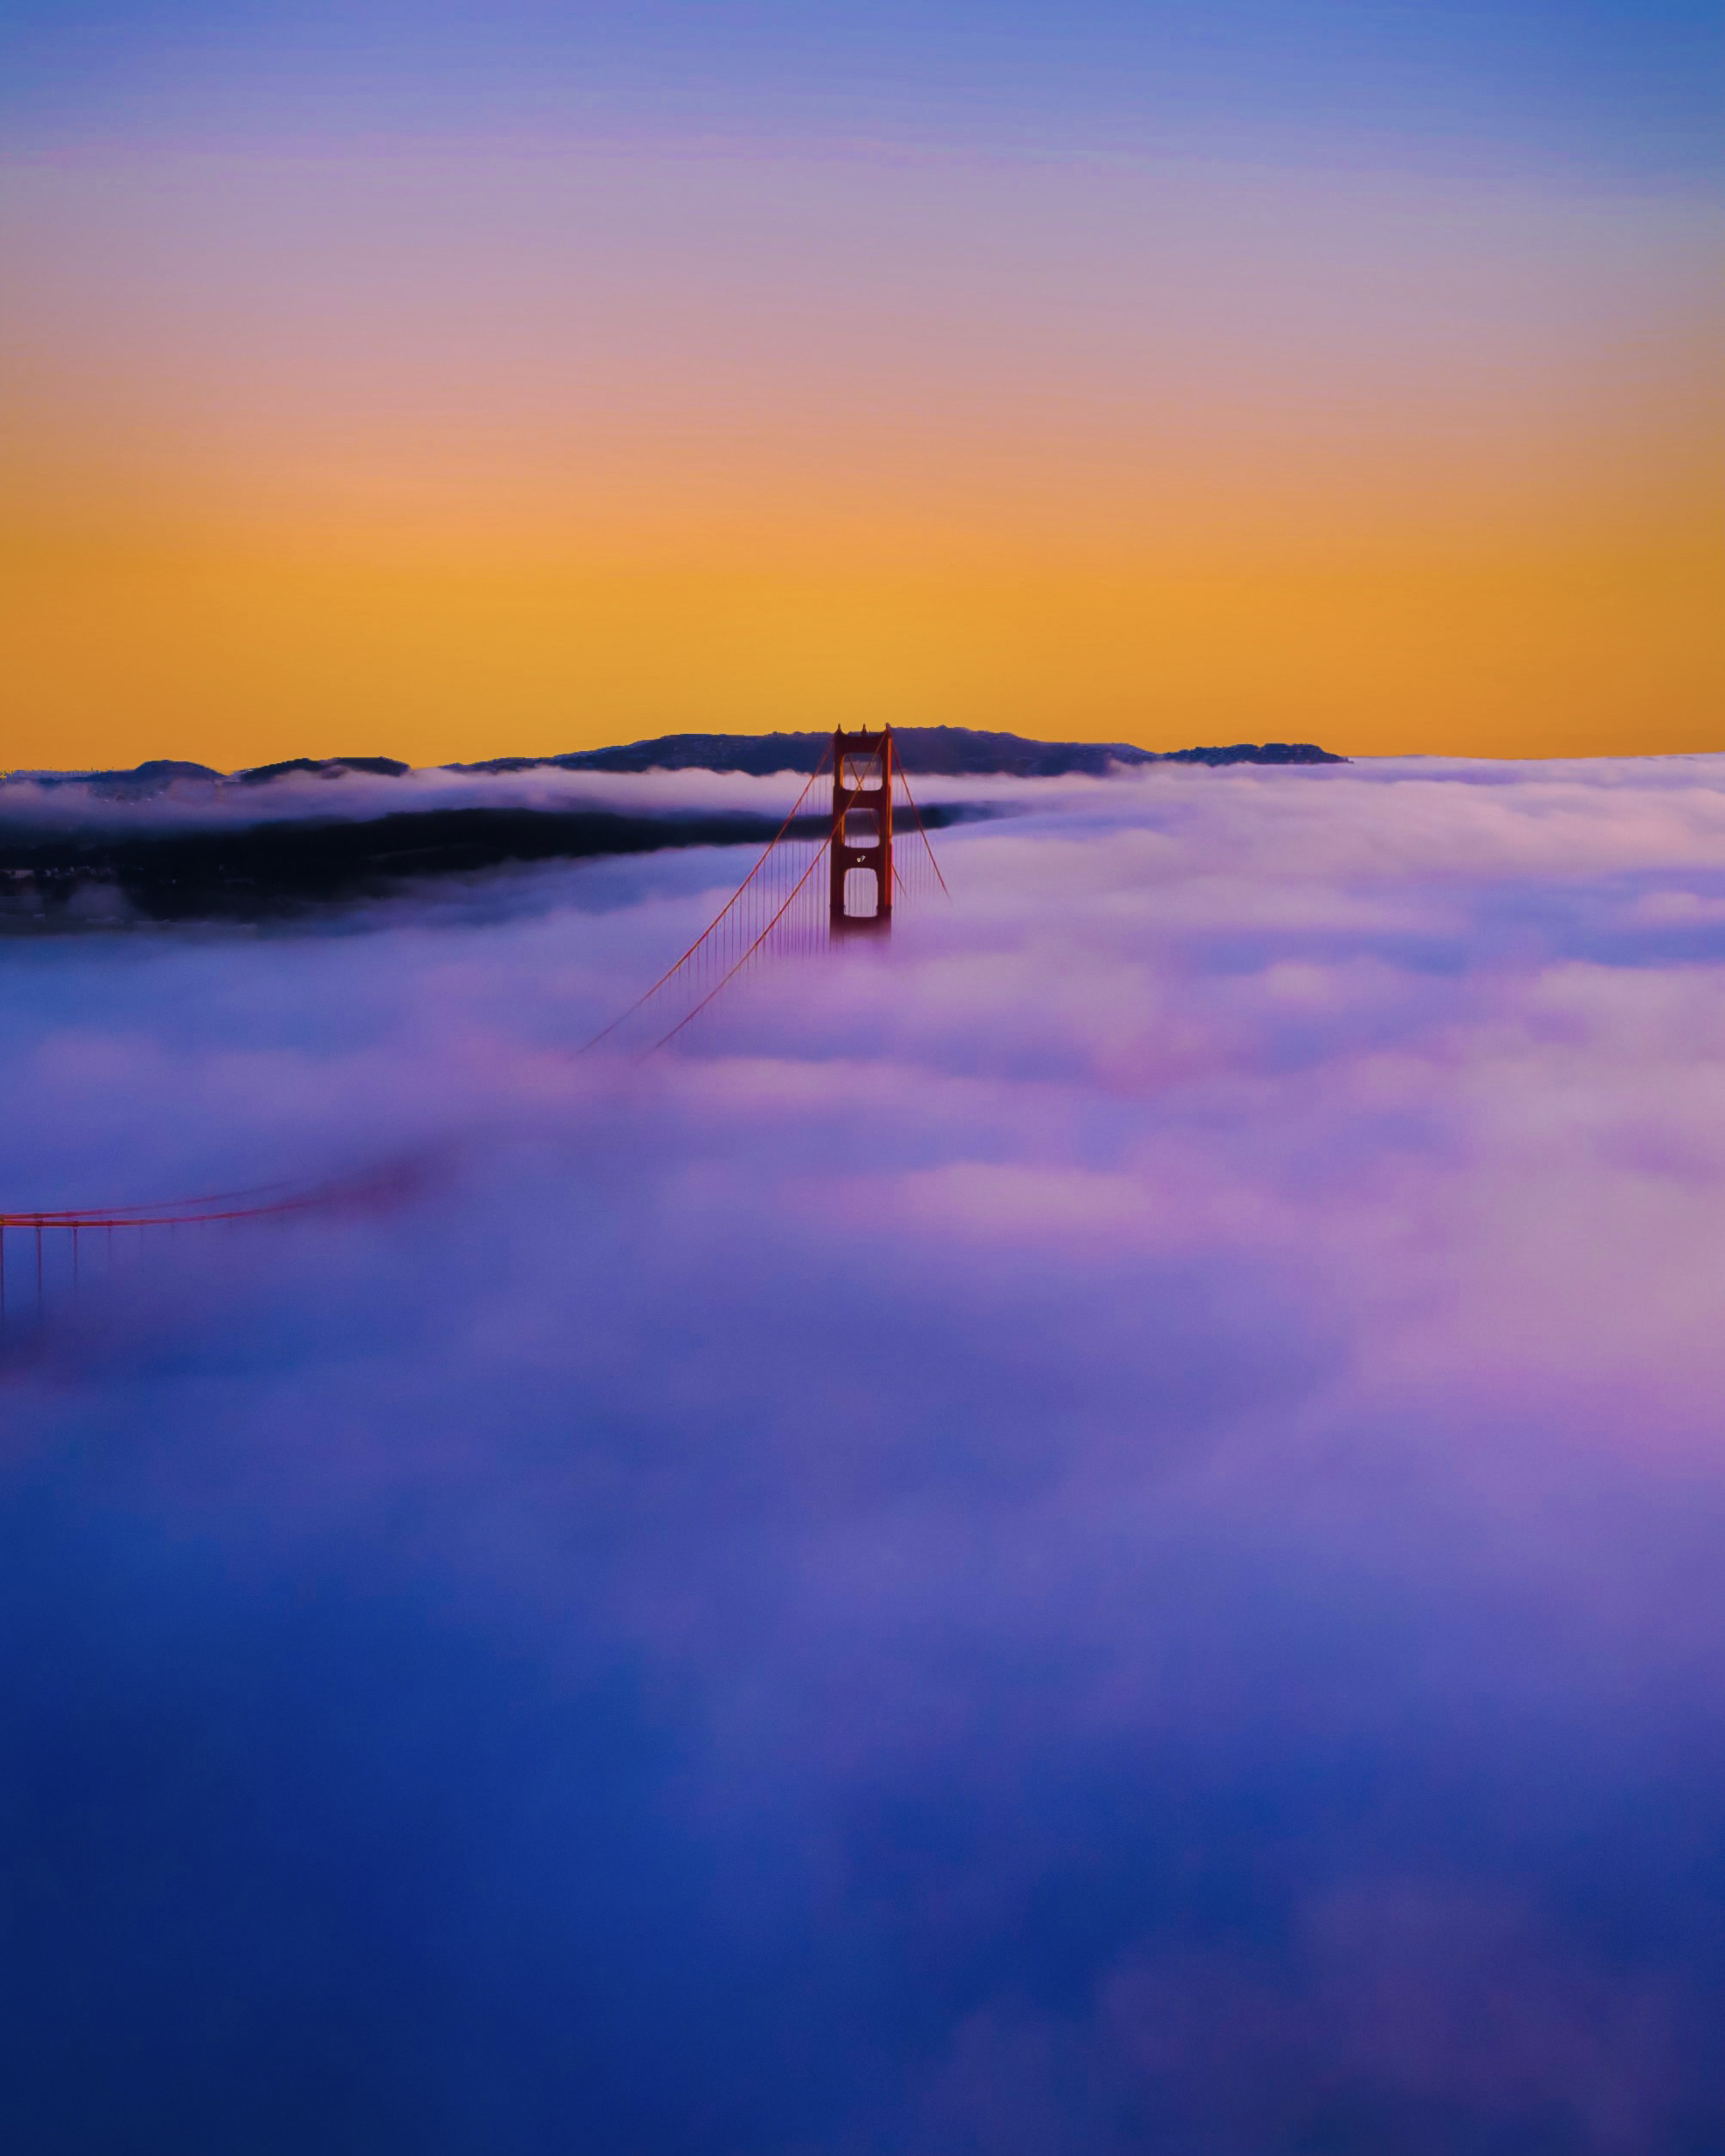 The top of the north tower of the Golden Gate Bridge, peeking out from a sunset-painted fog.